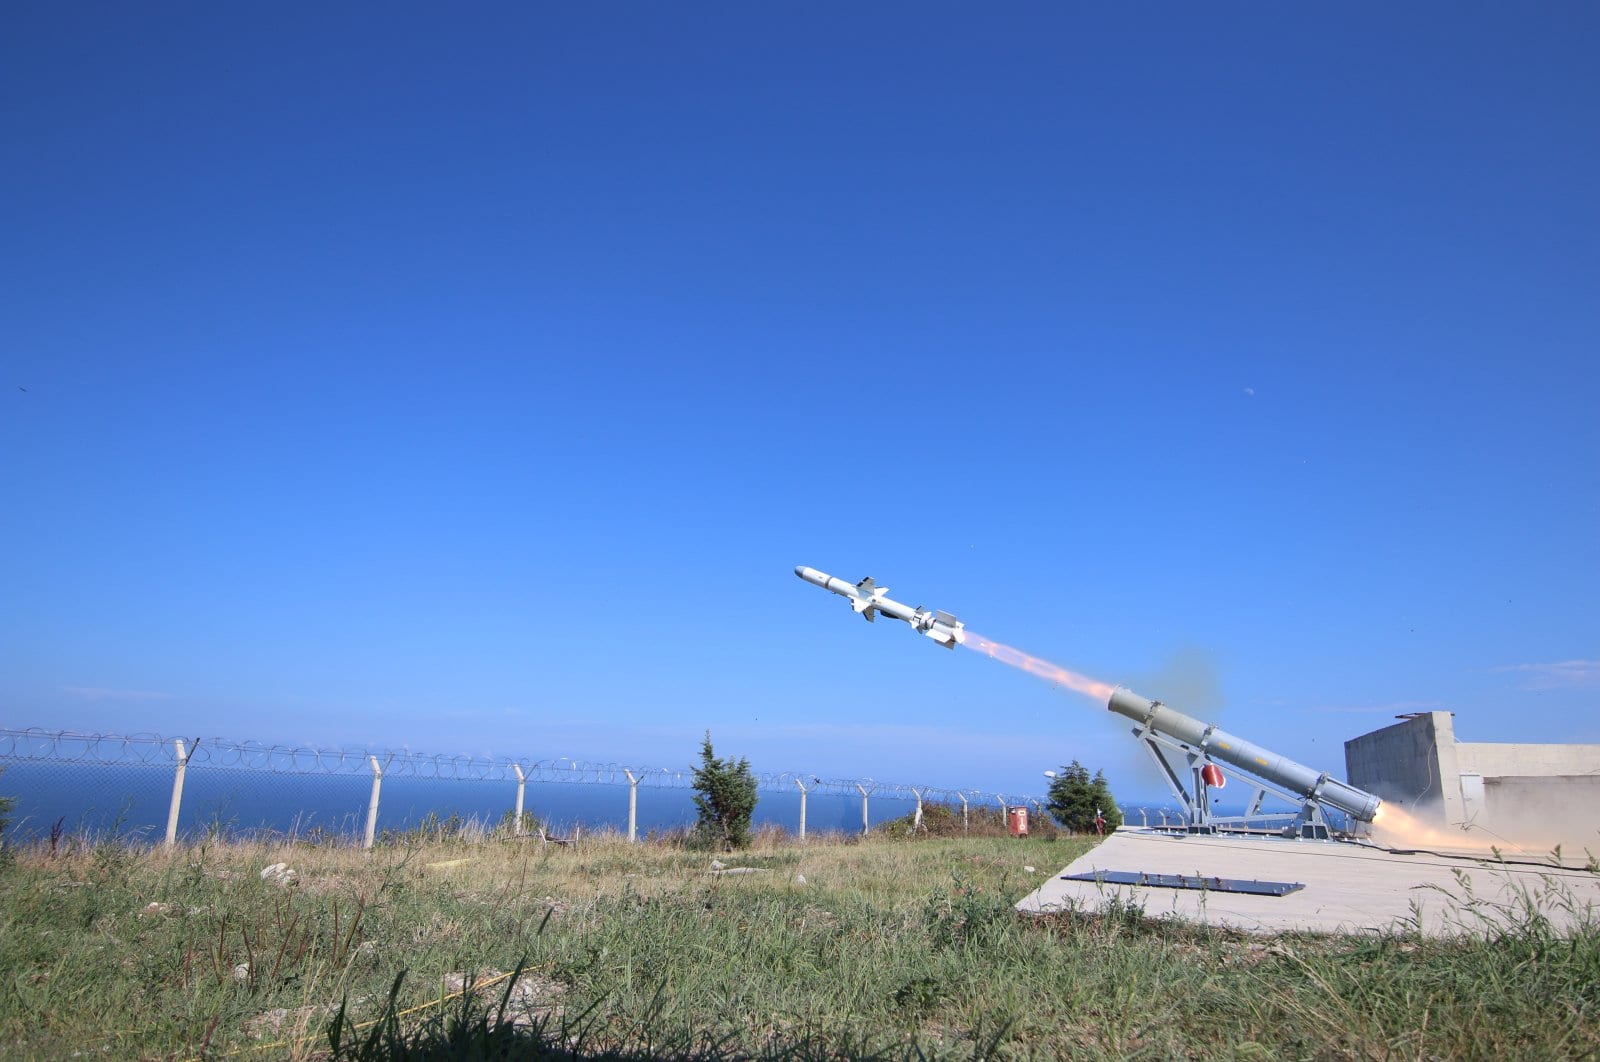 Turkey successfully conducted test-firing of locally made maritime missile